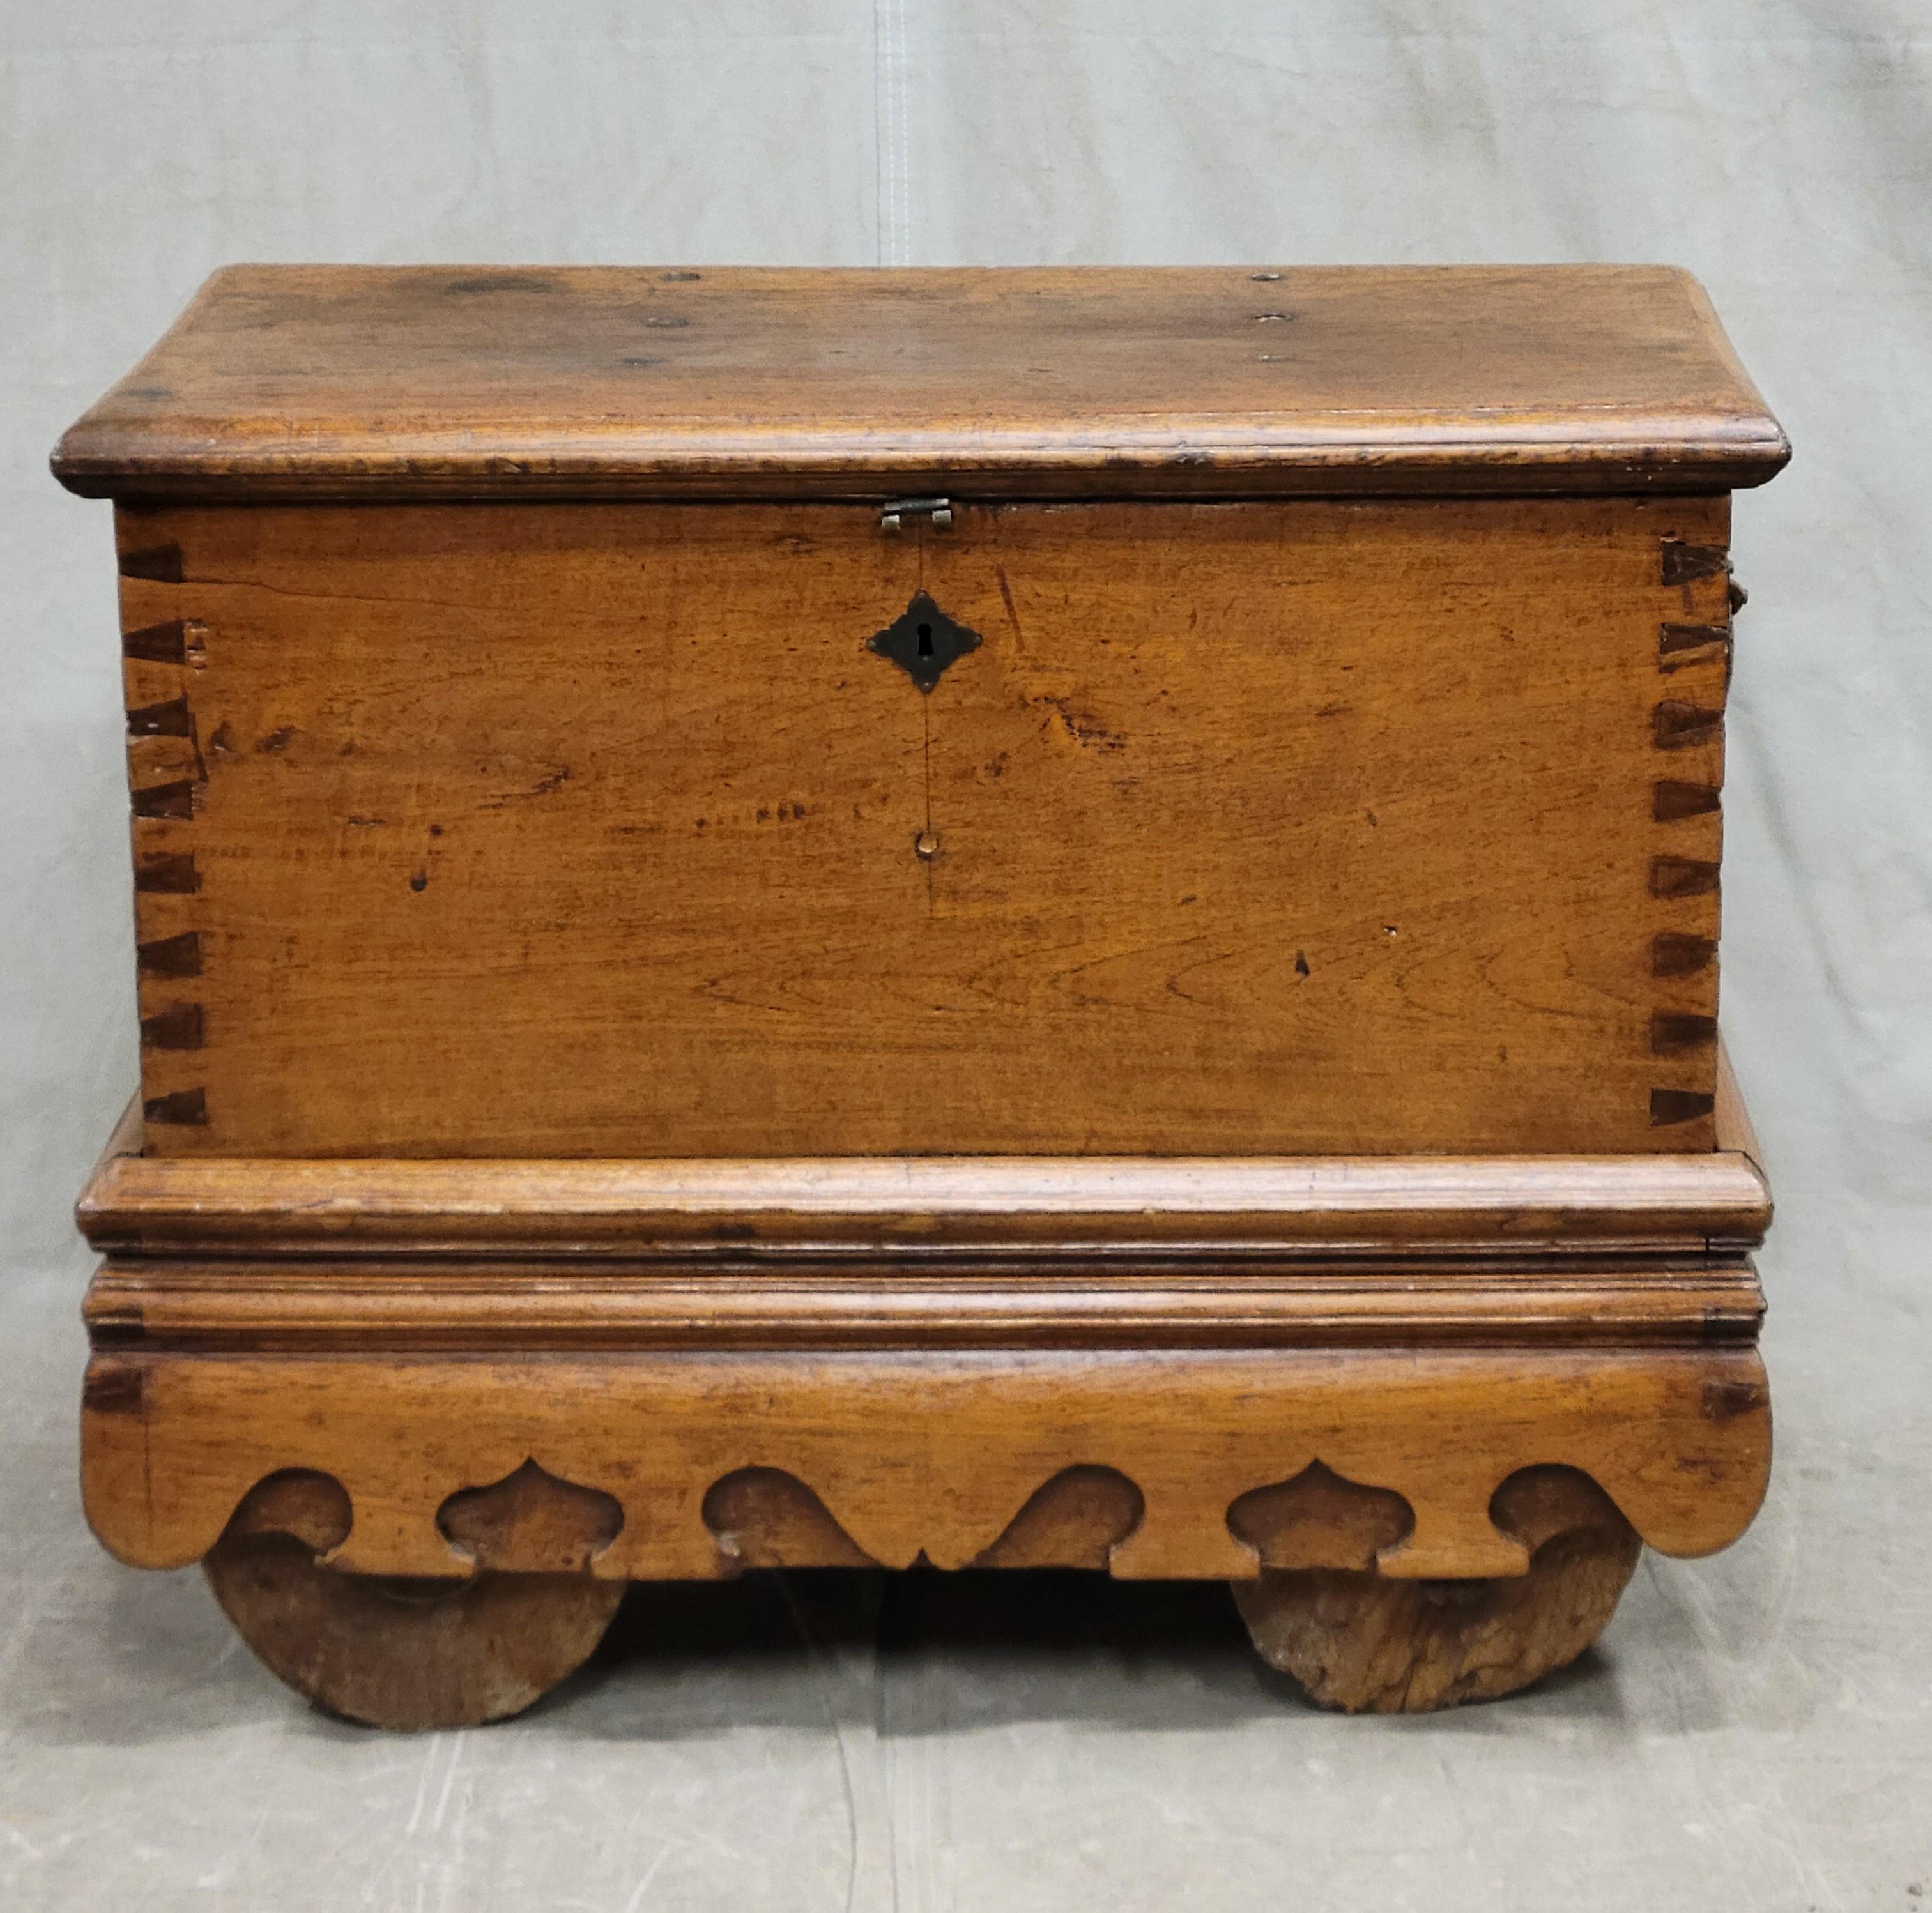 From Java (Indonesia) early 1900s, this dark teak chest has beautiful mortise and tenon joinery, a carved undulating skirt, heavy wood wheels that turn and hand forged iron hardware. The teak has beautiful patina. An interior compartment offers